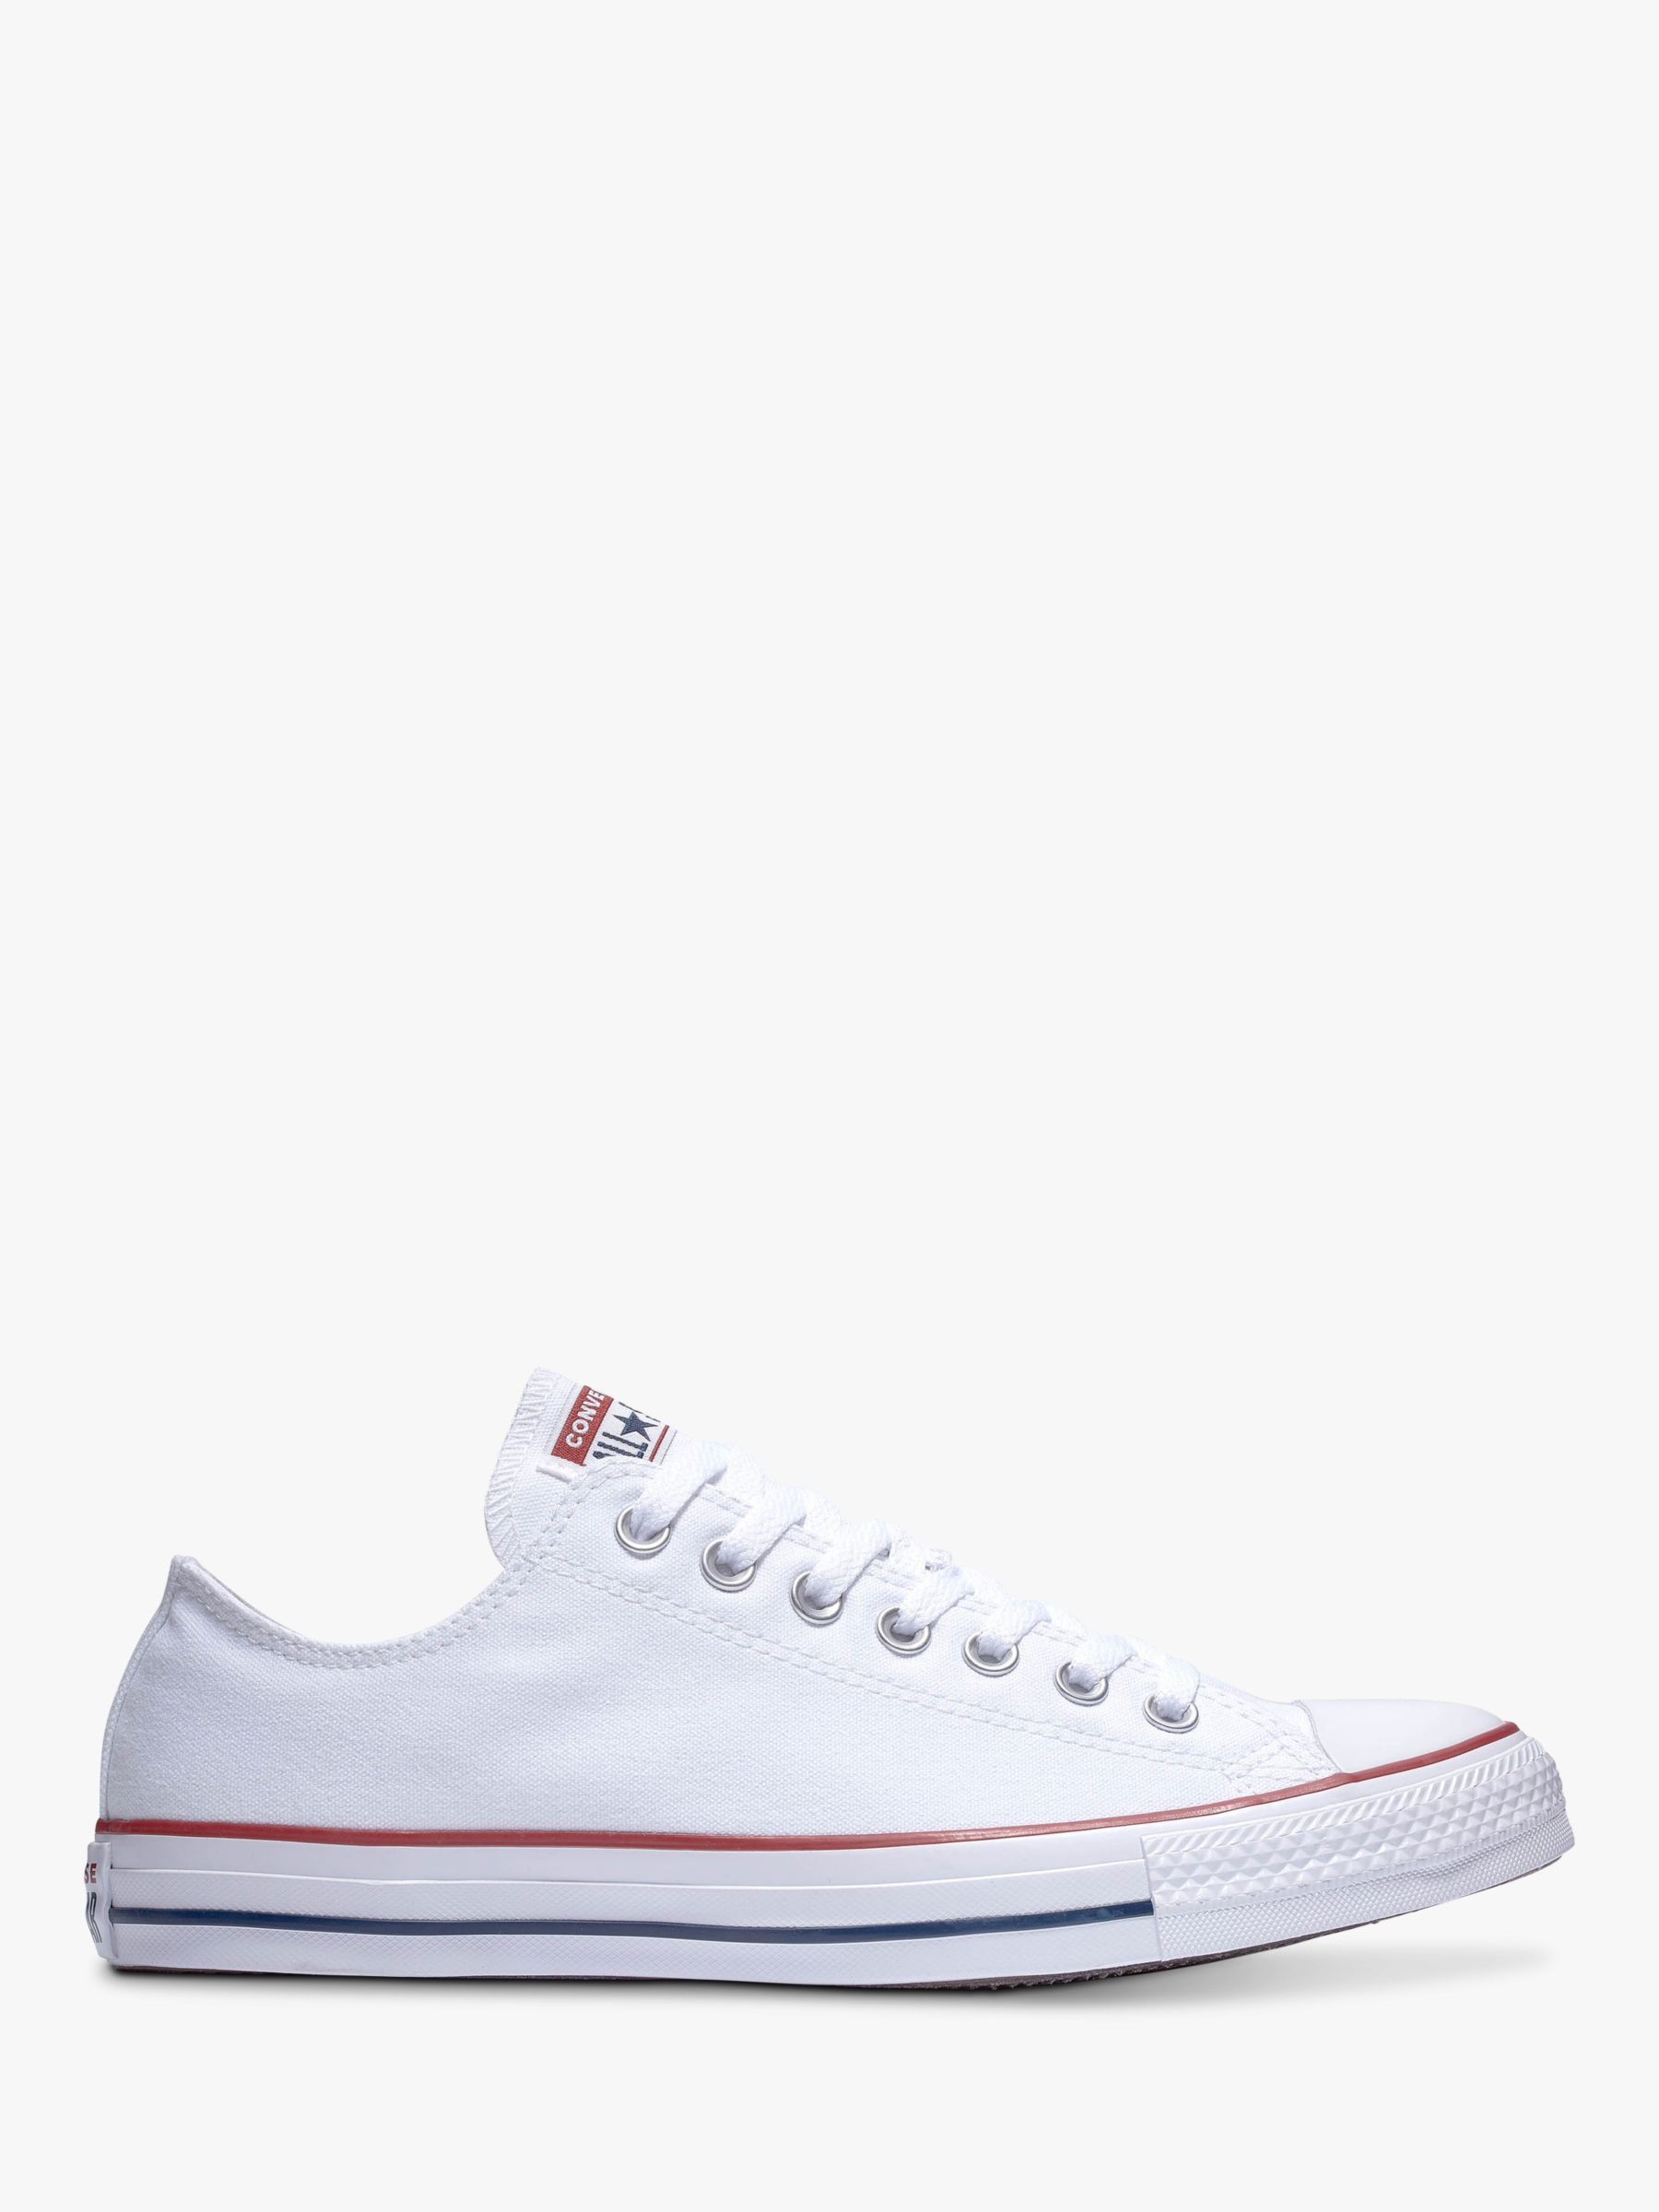 Converse Chuck Taylor All Star Canvas Ox Low-Top Trainers, White at ...